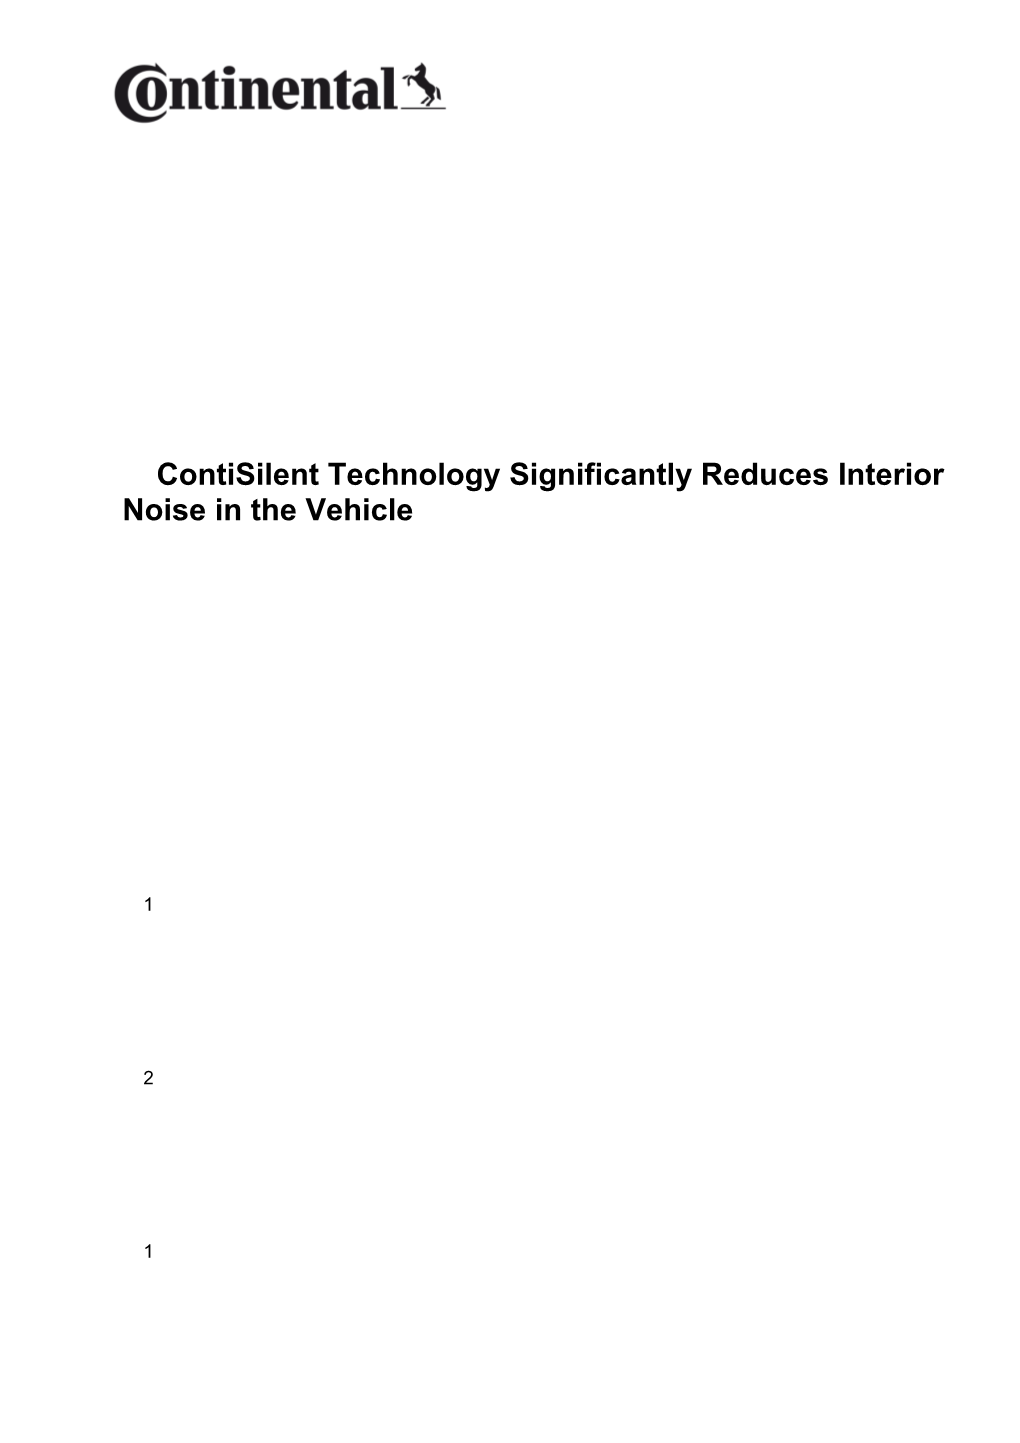 Contisilent Technology Significantly Reduces Interior Noise in the Vehicle